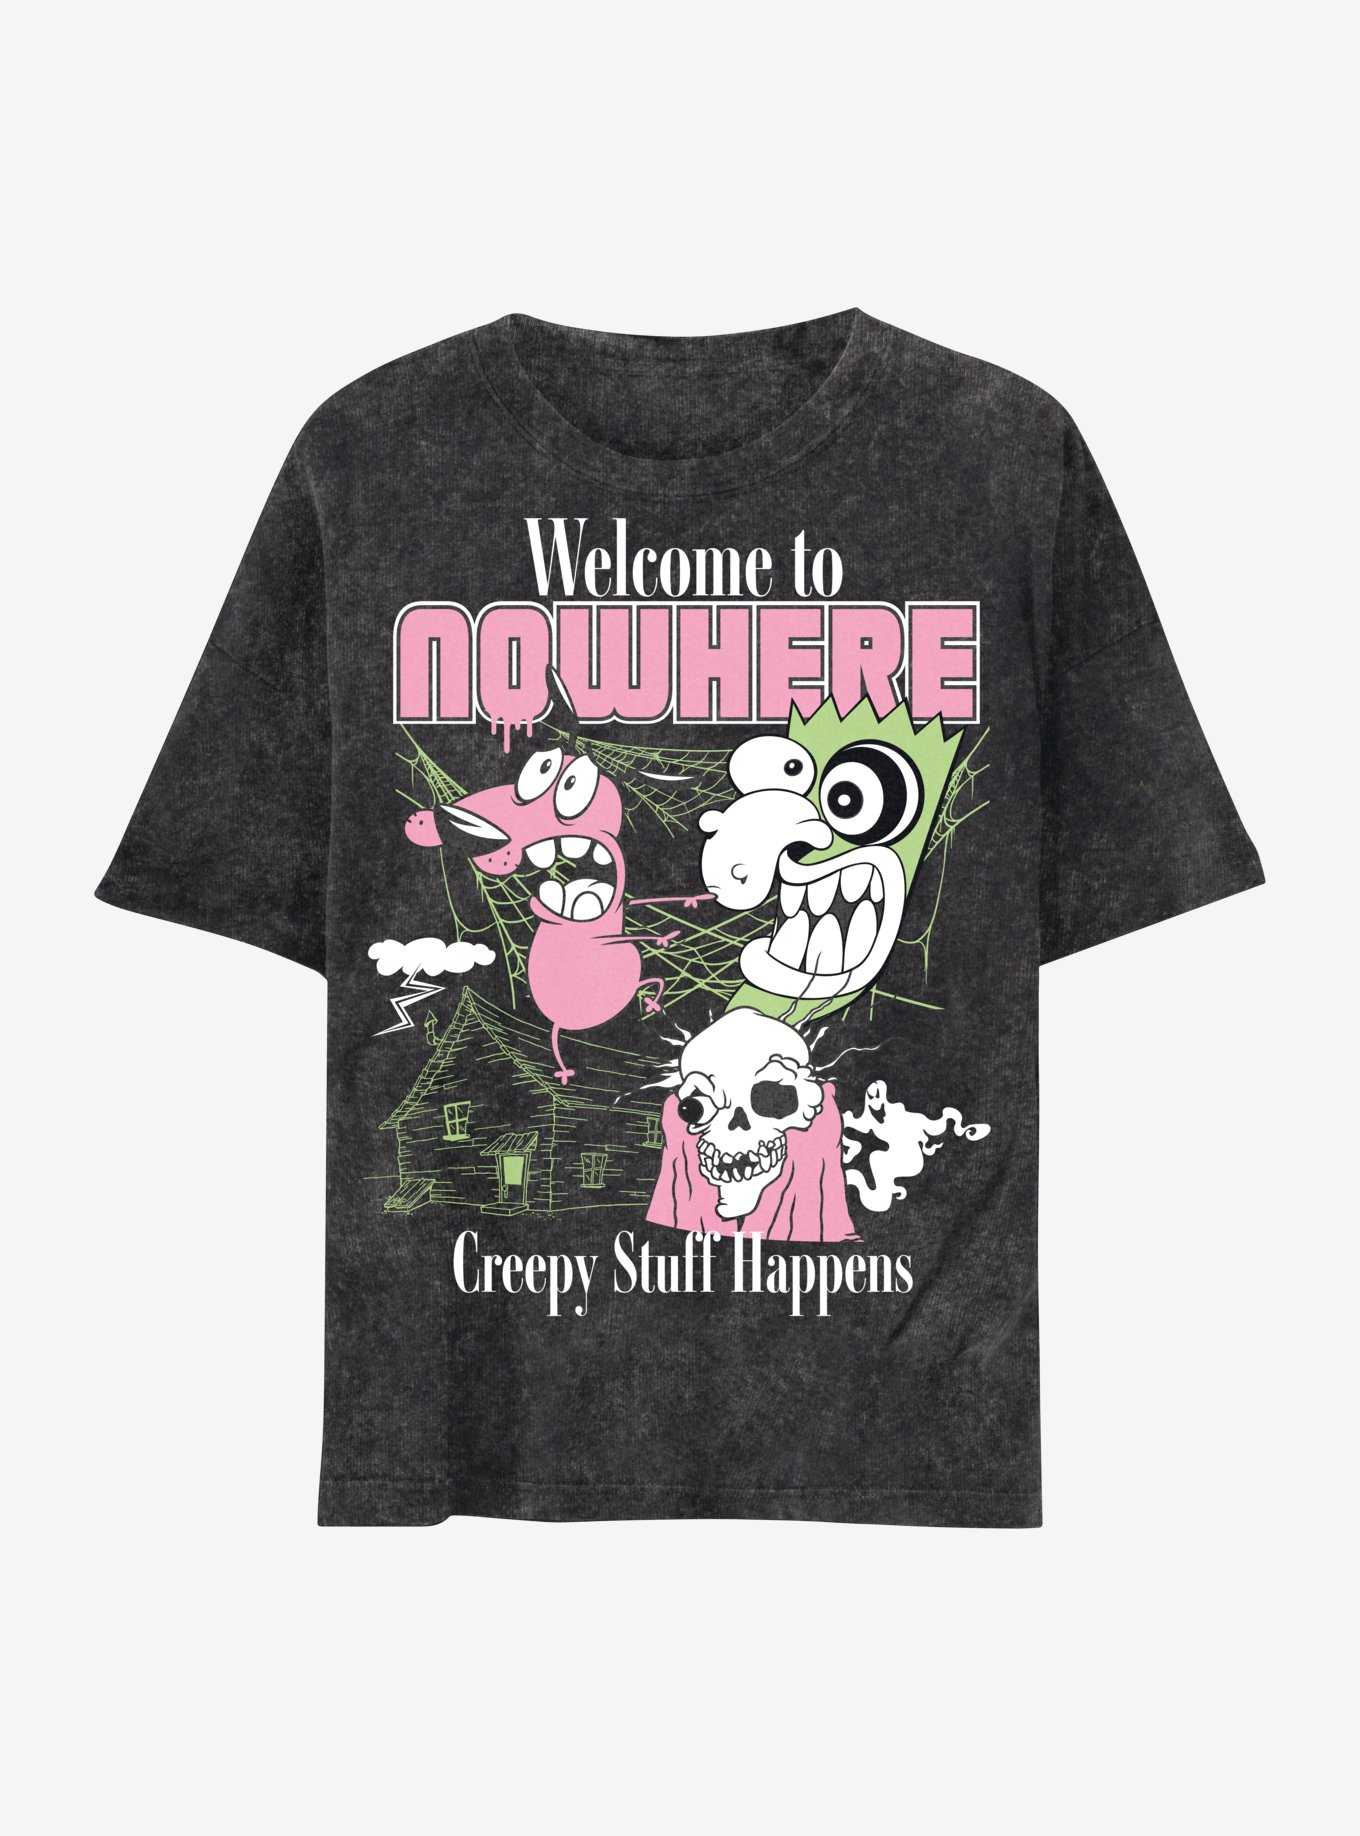 Courage The Cowardly Dog Welcome To Nowhere Dark Wash Boyfriend Fit Girls T-Shirt, , hi-res